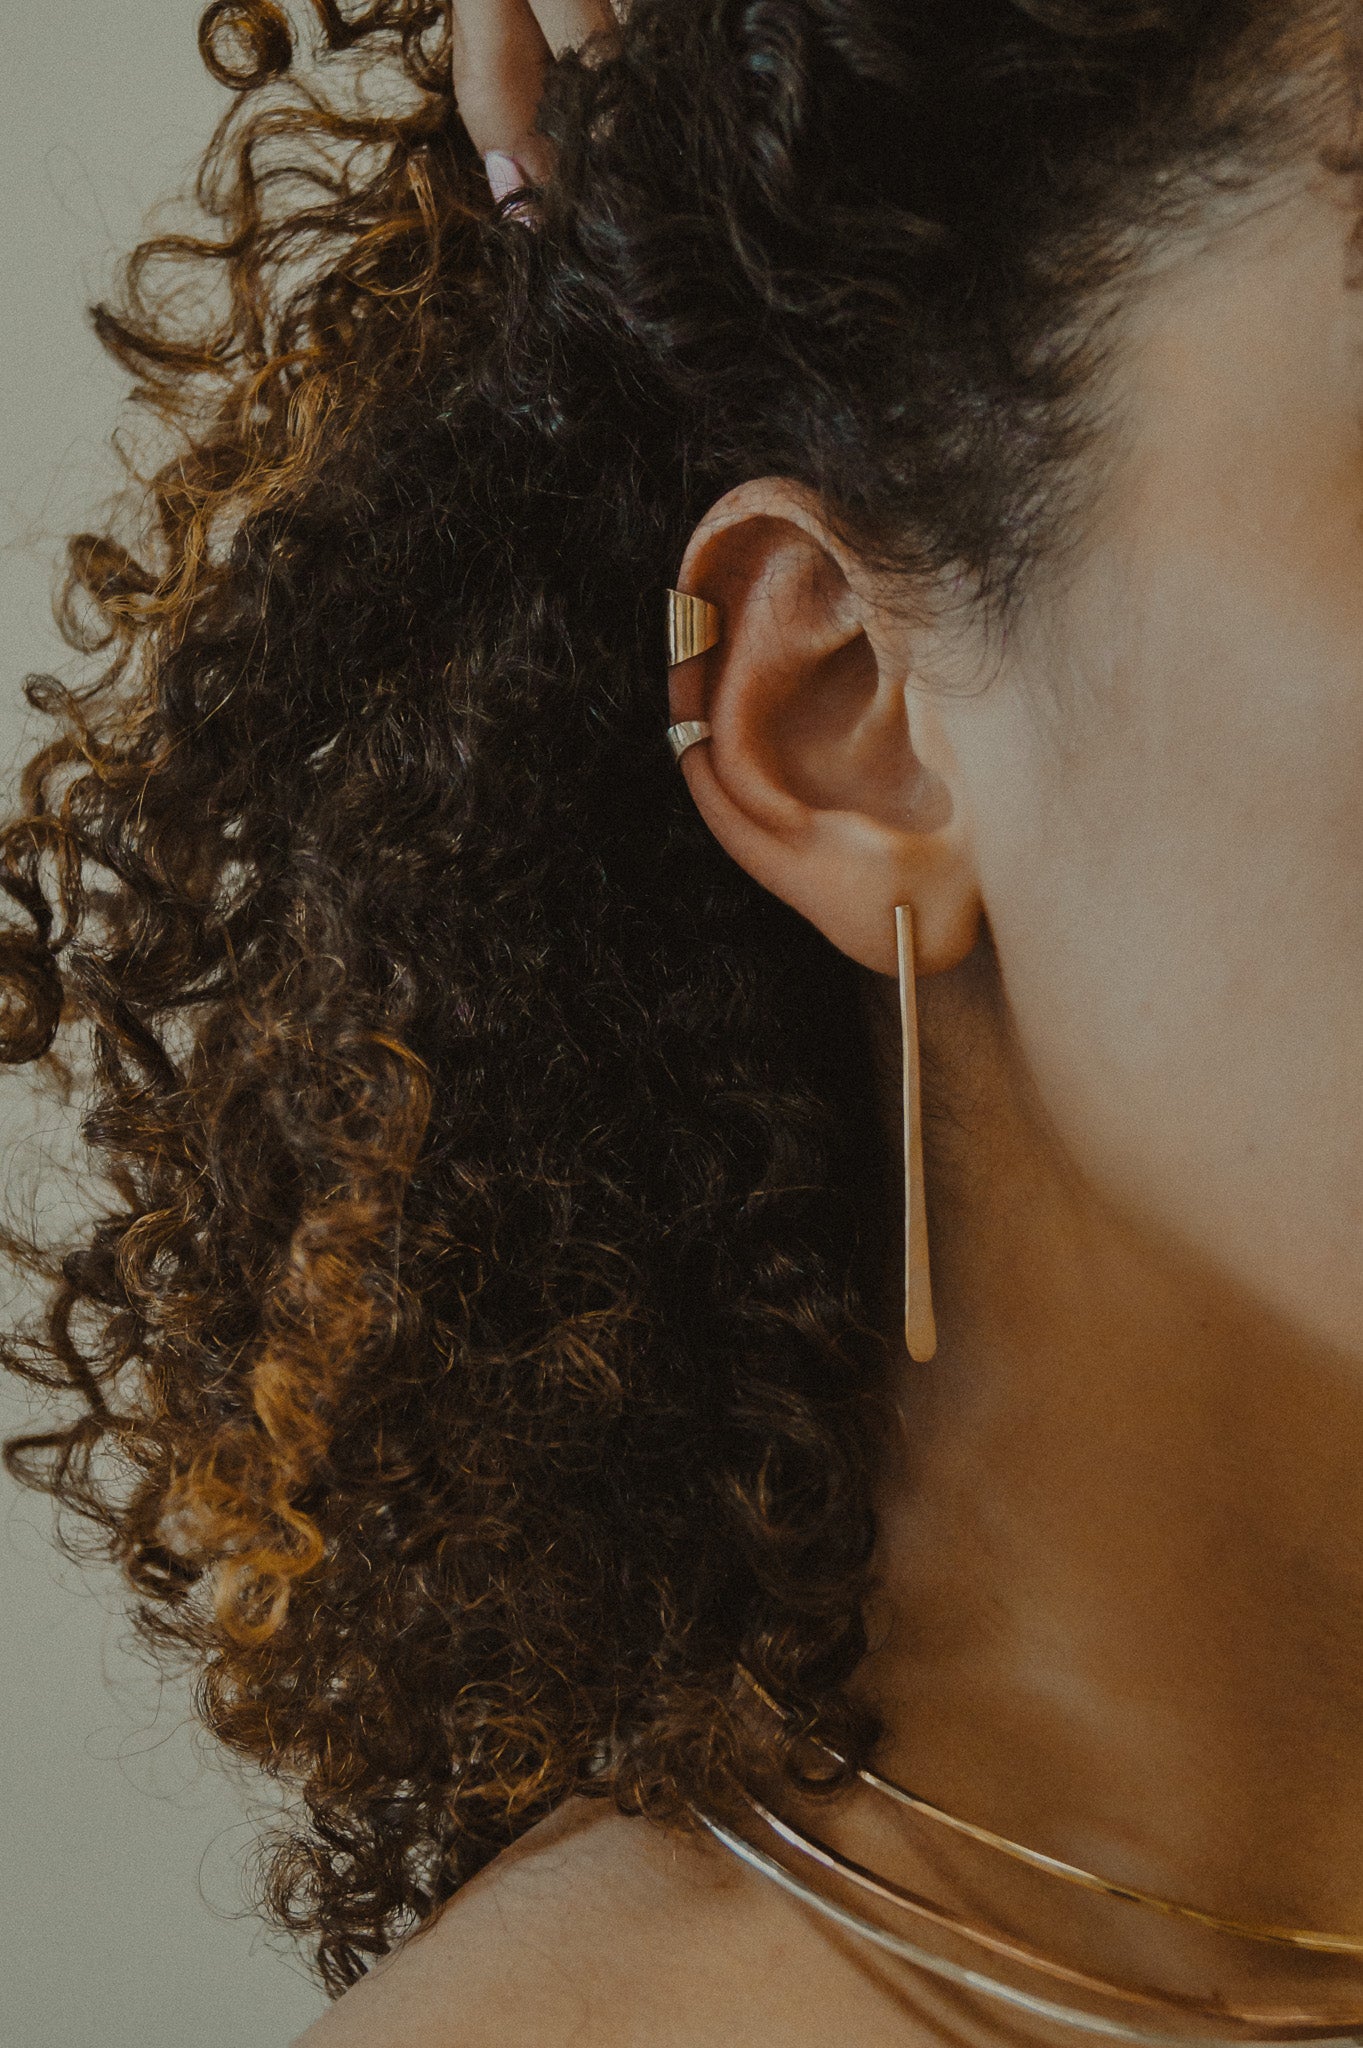 Shield Ear Cuff, Gold Fill, Rose Gold Fill, or Sterling Silver